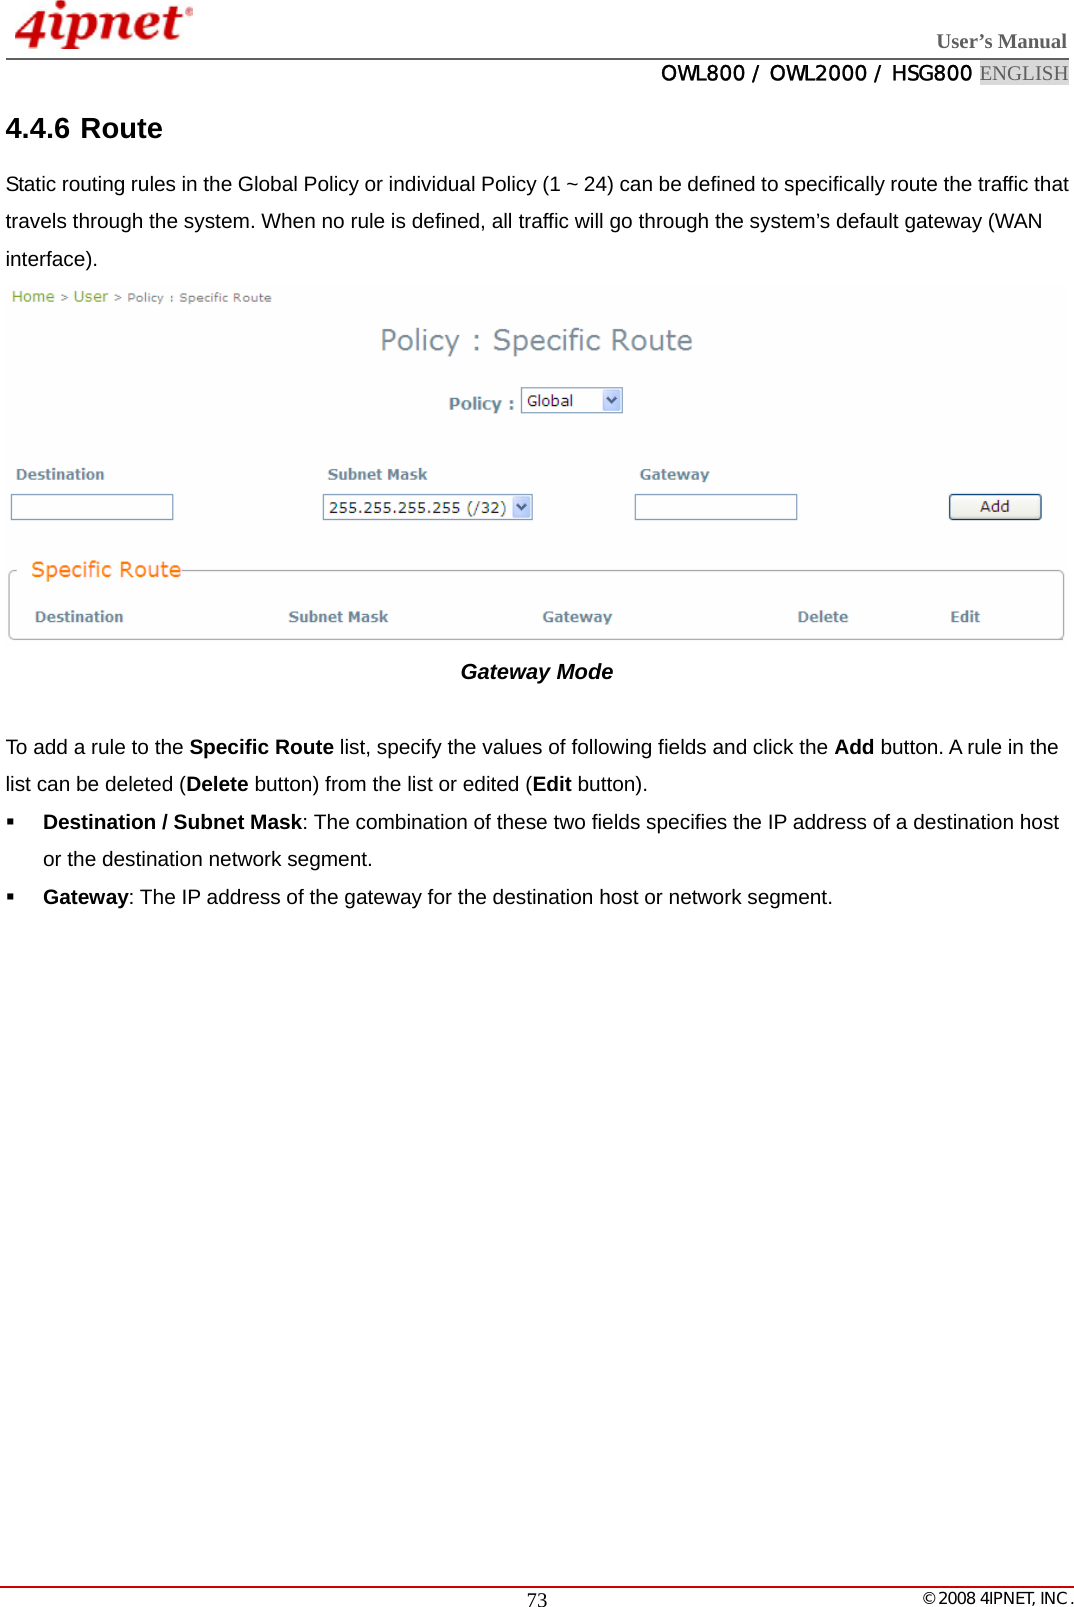  User’s Manual  OWL800 / OWL2000 / HSG800 ENGLISH   © 2008 4IPNET, INC.  734.4.6 Route Static routing rules in the Global Policy or individual Policy (1 ~ 24) can be defined to specifically route the traffic that travels through the system. When no rule is defined, all traffic will go through the system’s default gateway (WAN interface).  Gateway Mode    To add a rule to the Specific Route list, specify the values of following fields and click the Add button. A rule in the list can be deleted (Delete button) from the list or edited (Edit button).  Destination / Subnet Mask: The combination of these two fields specifies the IP address of a destination host or the destination network segment.  Gateway: The IP address of the gateway for the destination host or network segment.   